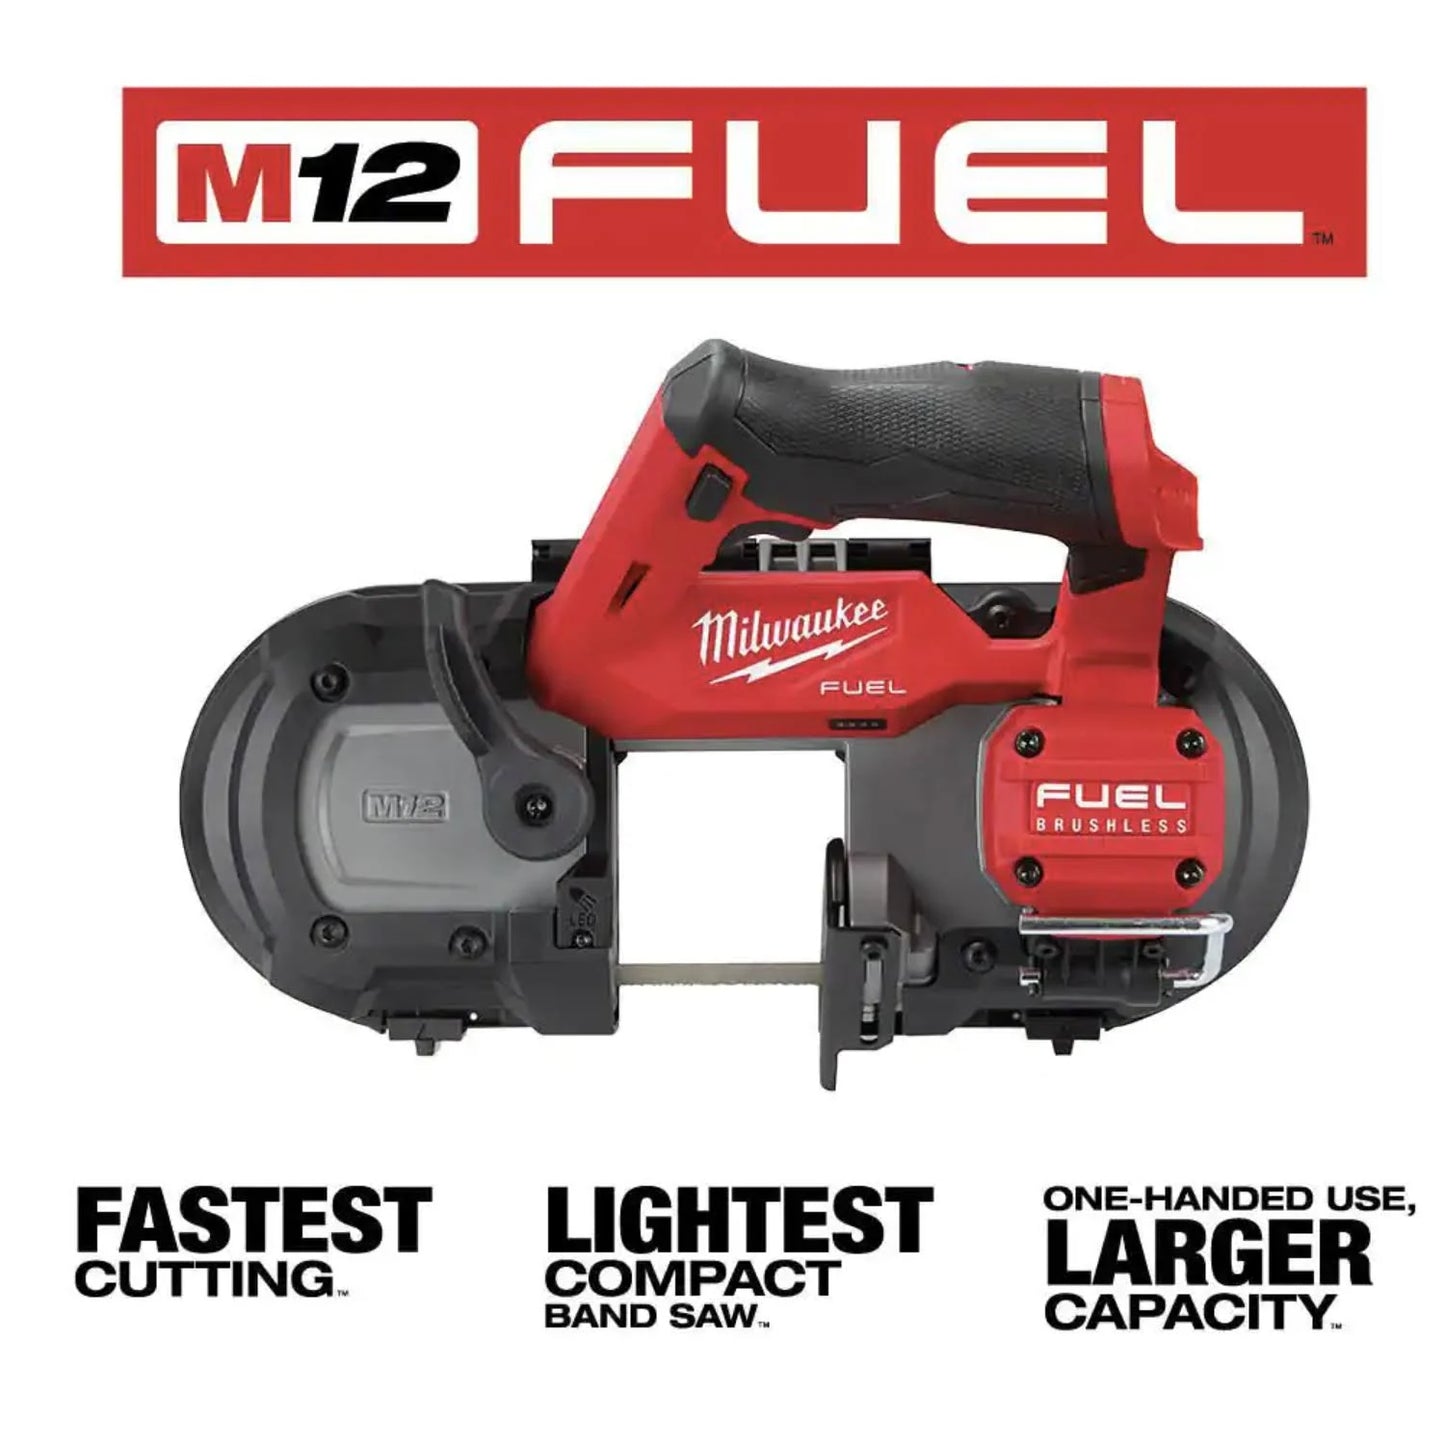 Milwaukee M12 FUEL™ Compact Band Saw - Tool Only 2529-20